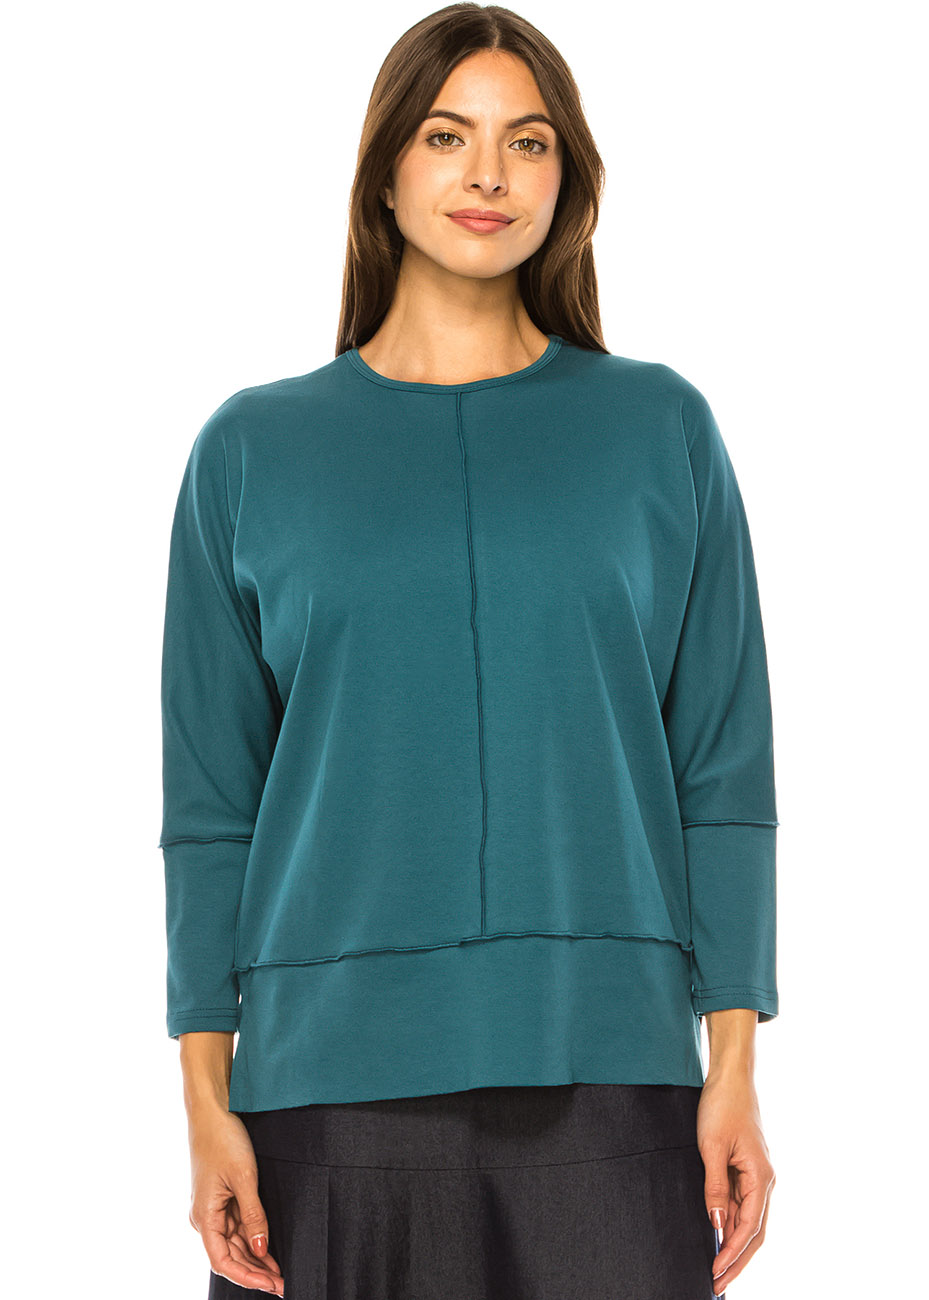 Teal Tranquility Long Sleeve Tee